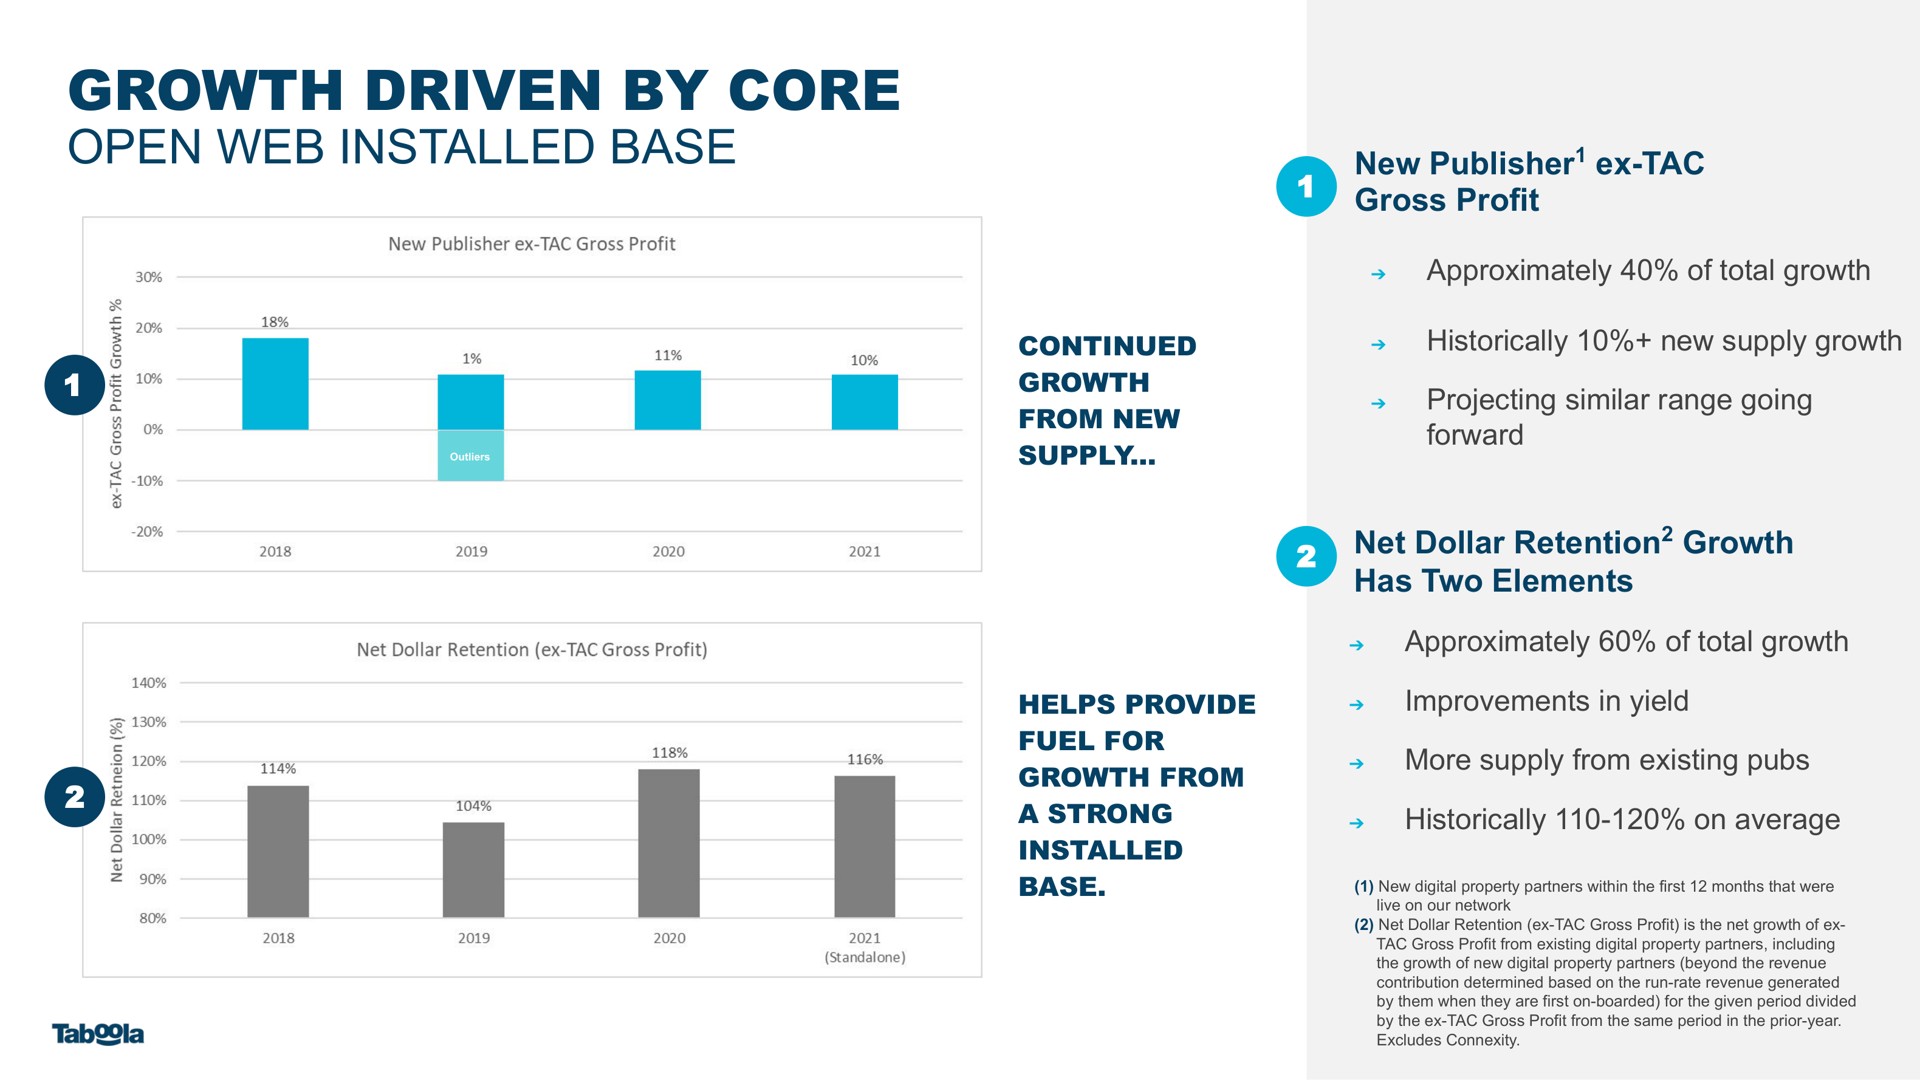 growth driven by core | Taboola